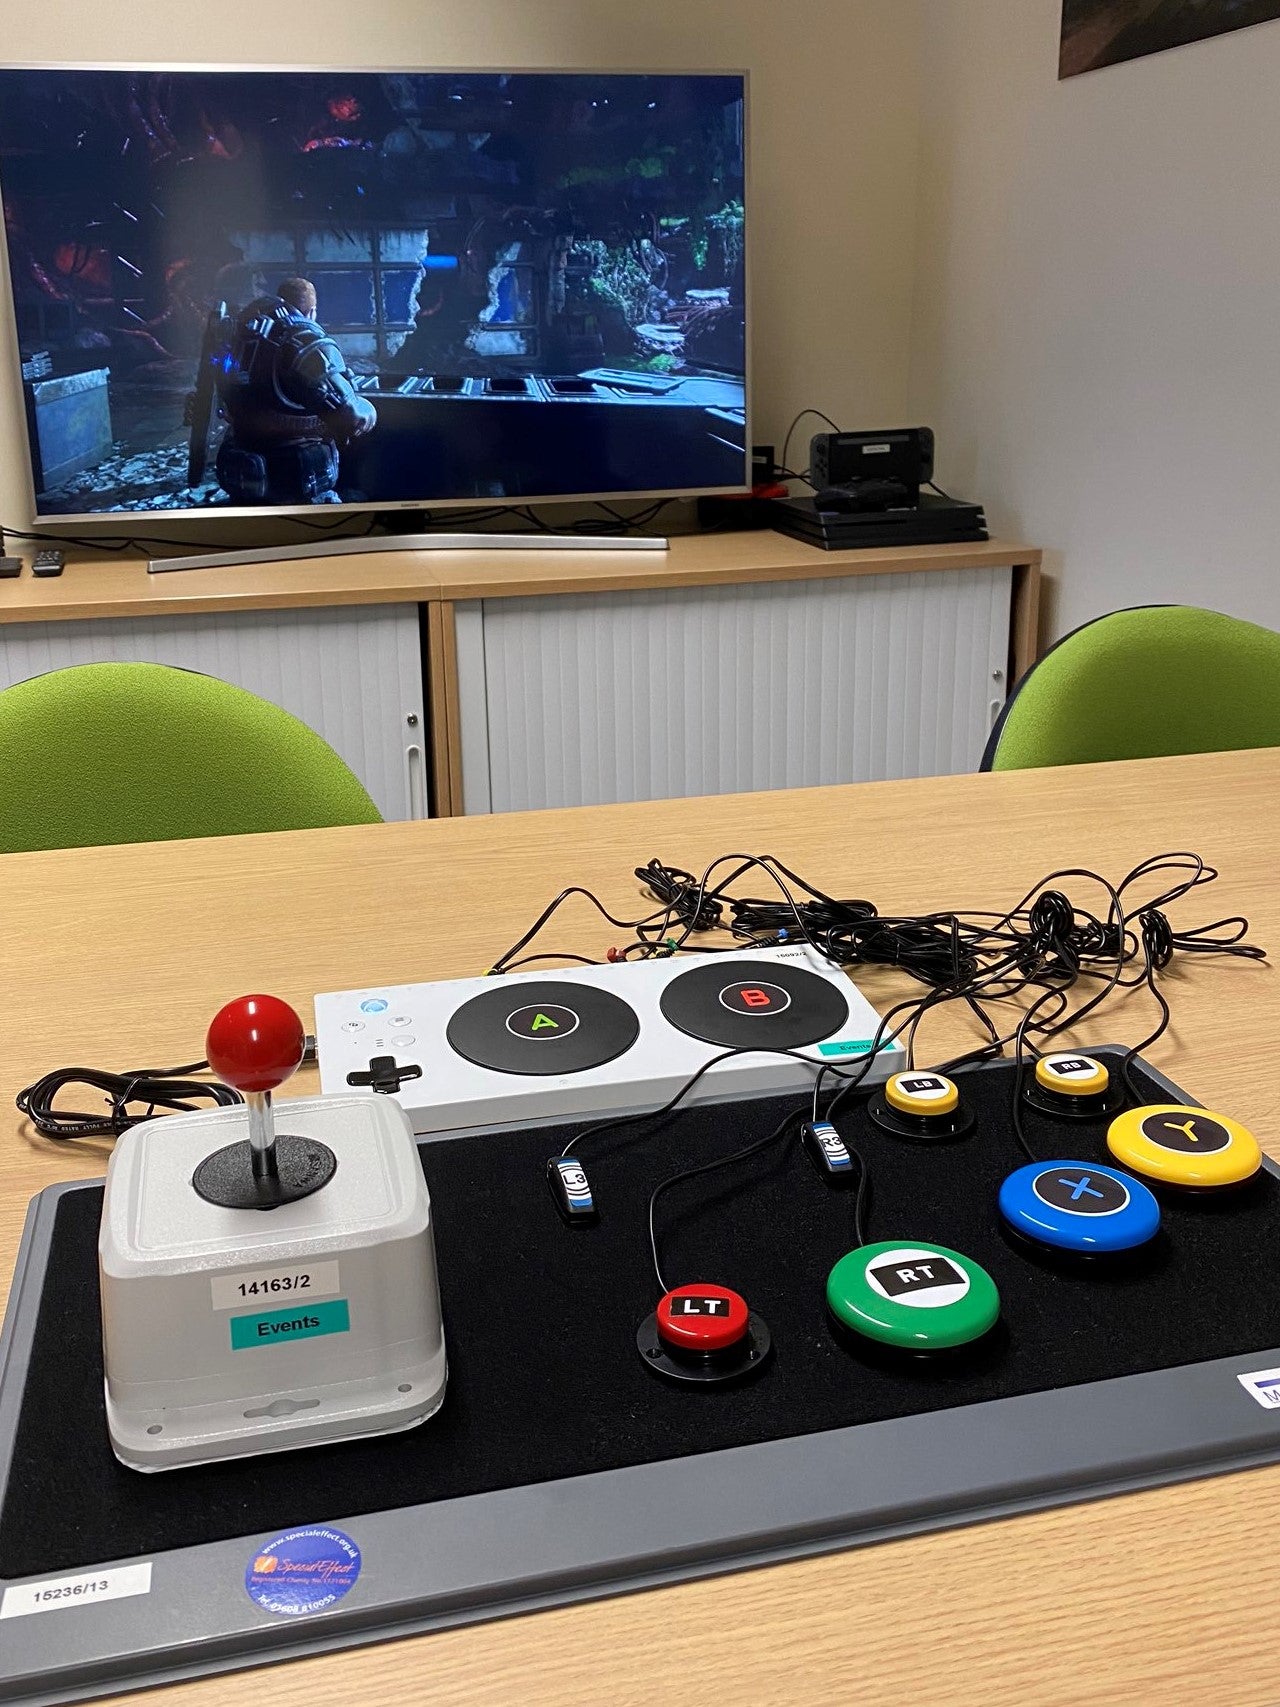 A close-up of a bespoke SpecialEffect controller set-up on a table. There's a joystick, there are several big buttons scattered nearby, and there's the Xbox Adaptive Controller, which everything is wired into. In the background, Gears of War is playin gon a TV.